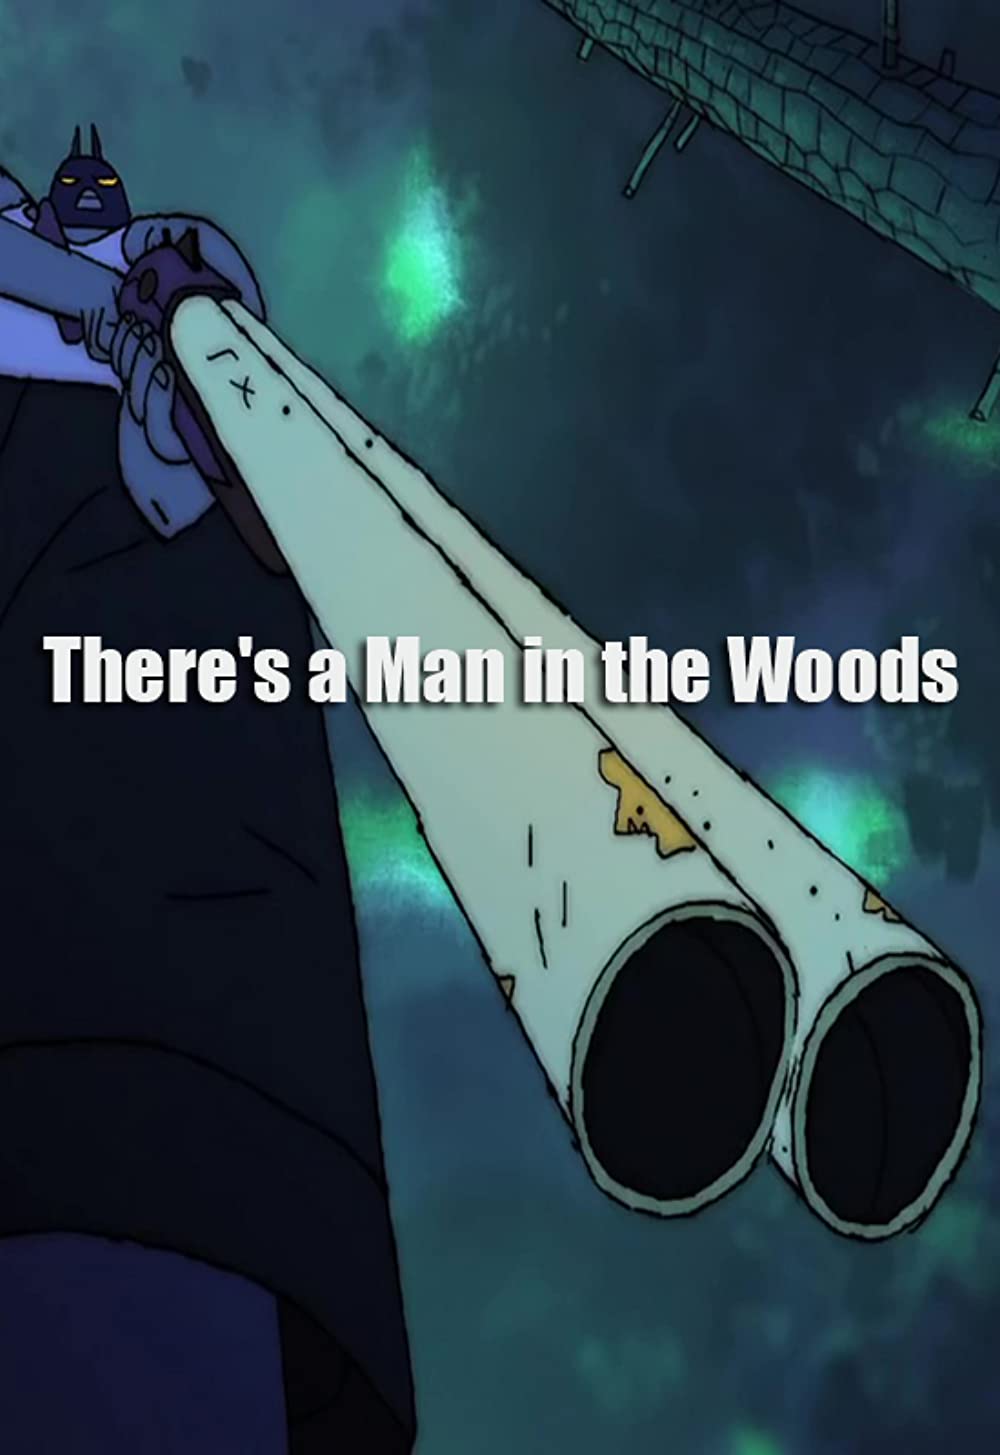 There’s a Man in the Woods (Short 2014)